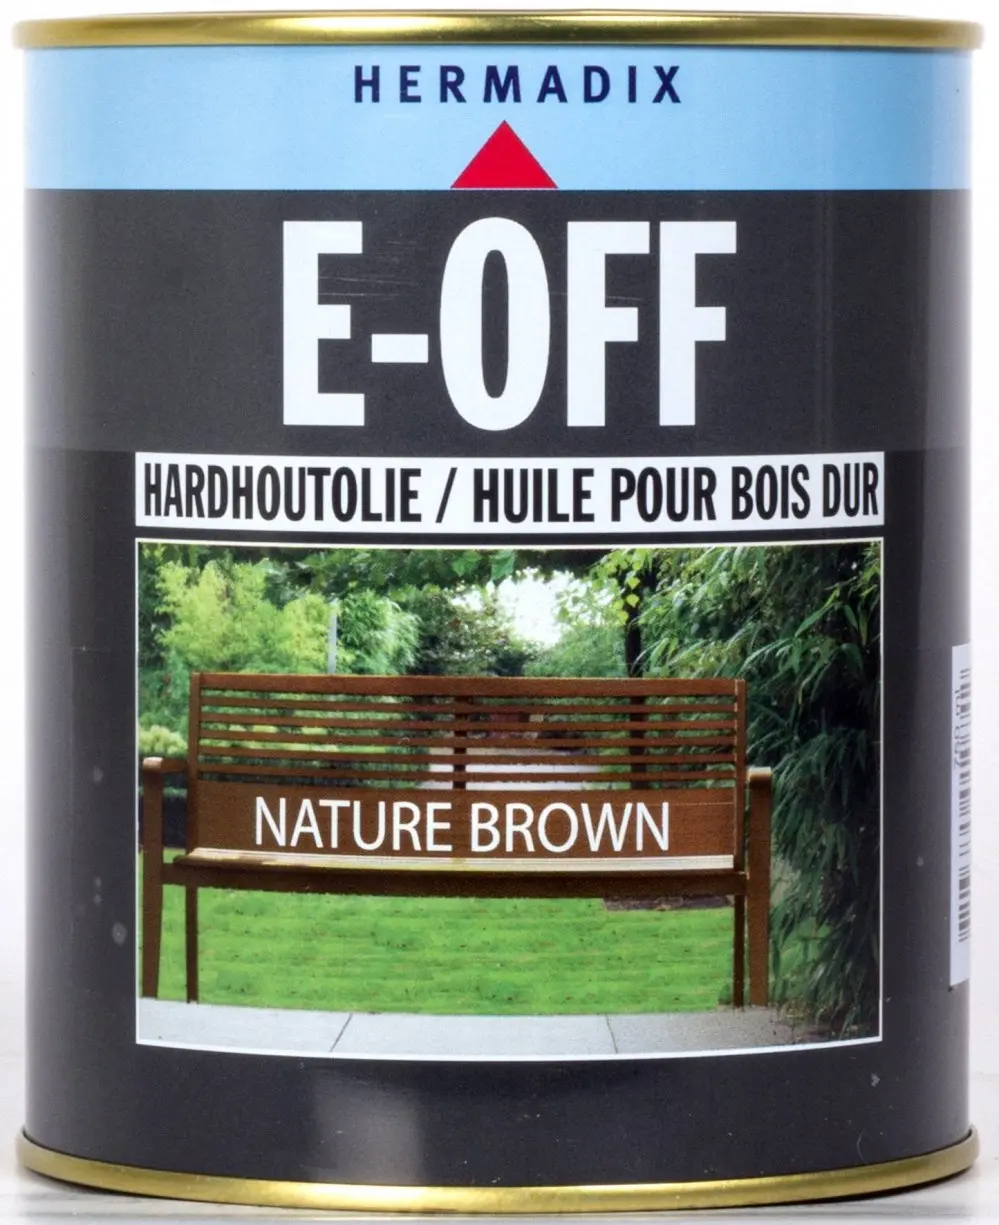 Hermadix - e-off-nature-brown-verfcompleet